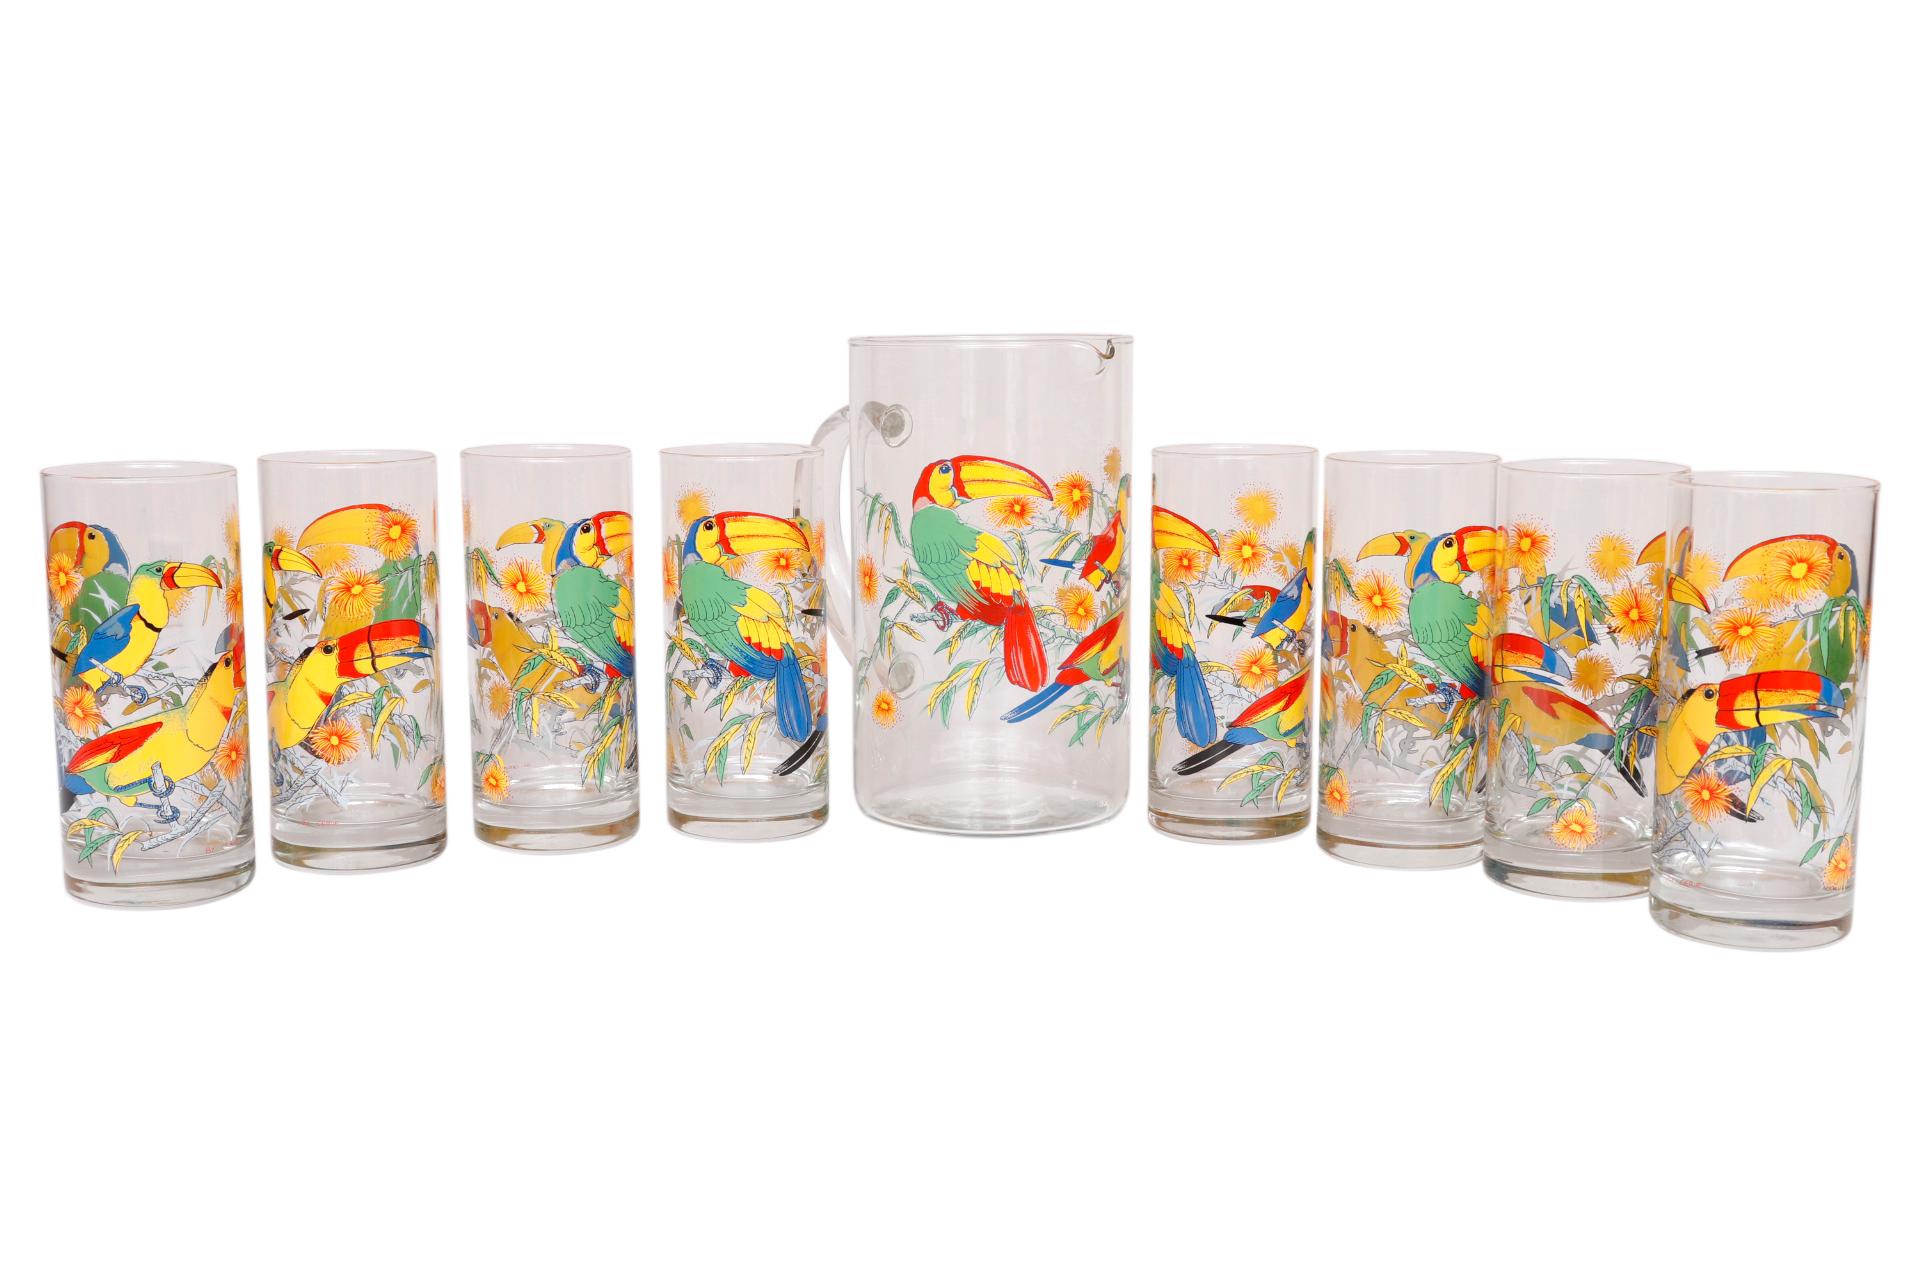 A set of eight glass tumblers with matching glass pitcher. Glasses are printed with colorful toucans and bright yellow flowers. The pitcher has a narrow spout for pouring and a clear glass handle. Made in Italy by Cerve. Each glass measures 2.5